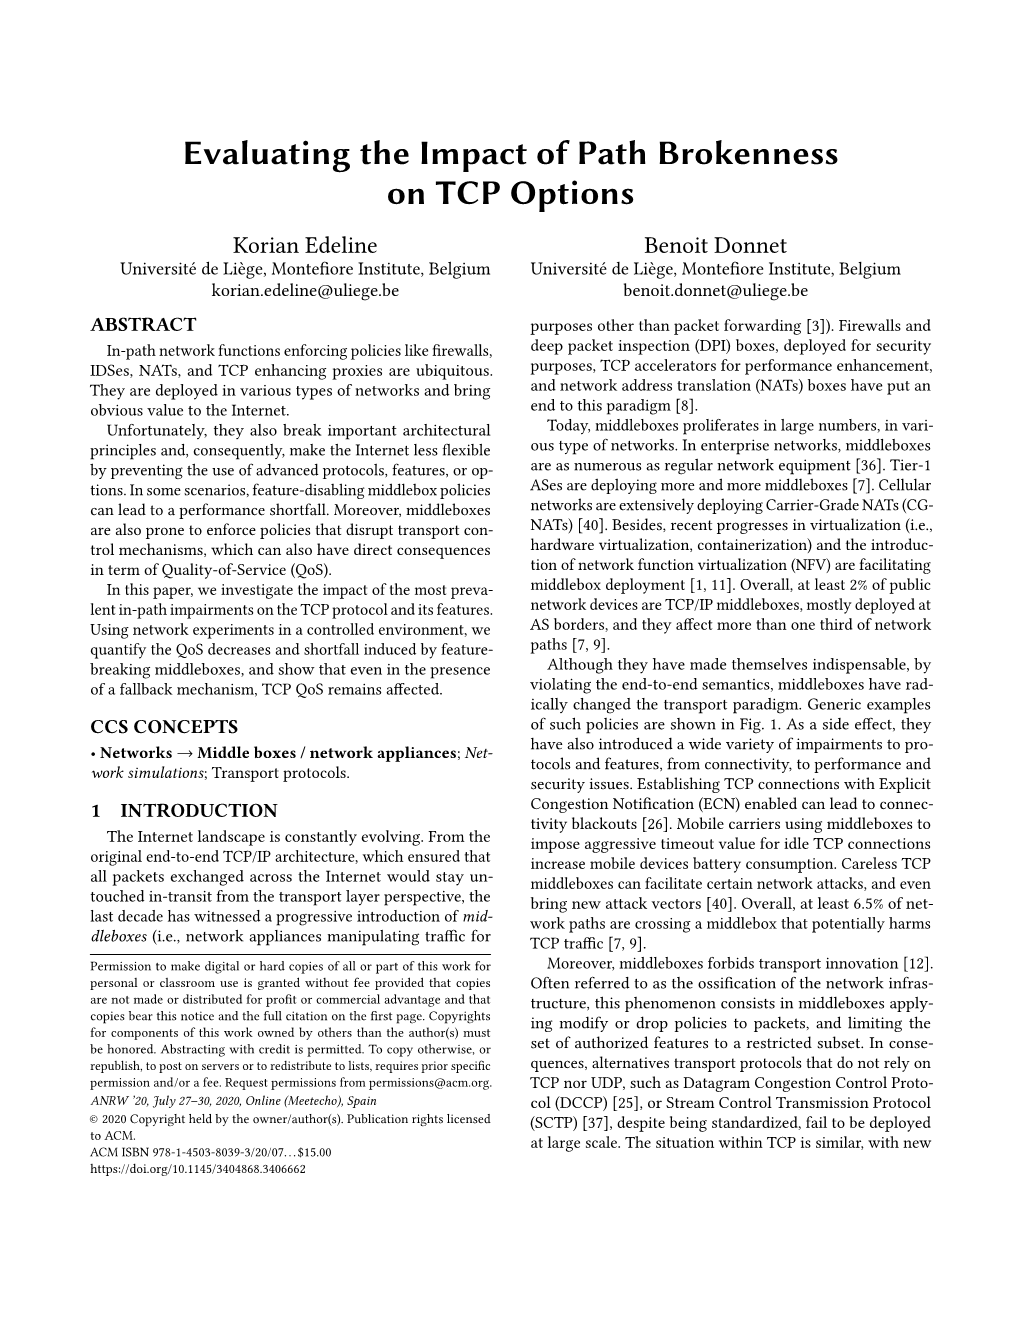 Evaluating the Impact of Path Brokennesson TCP Options